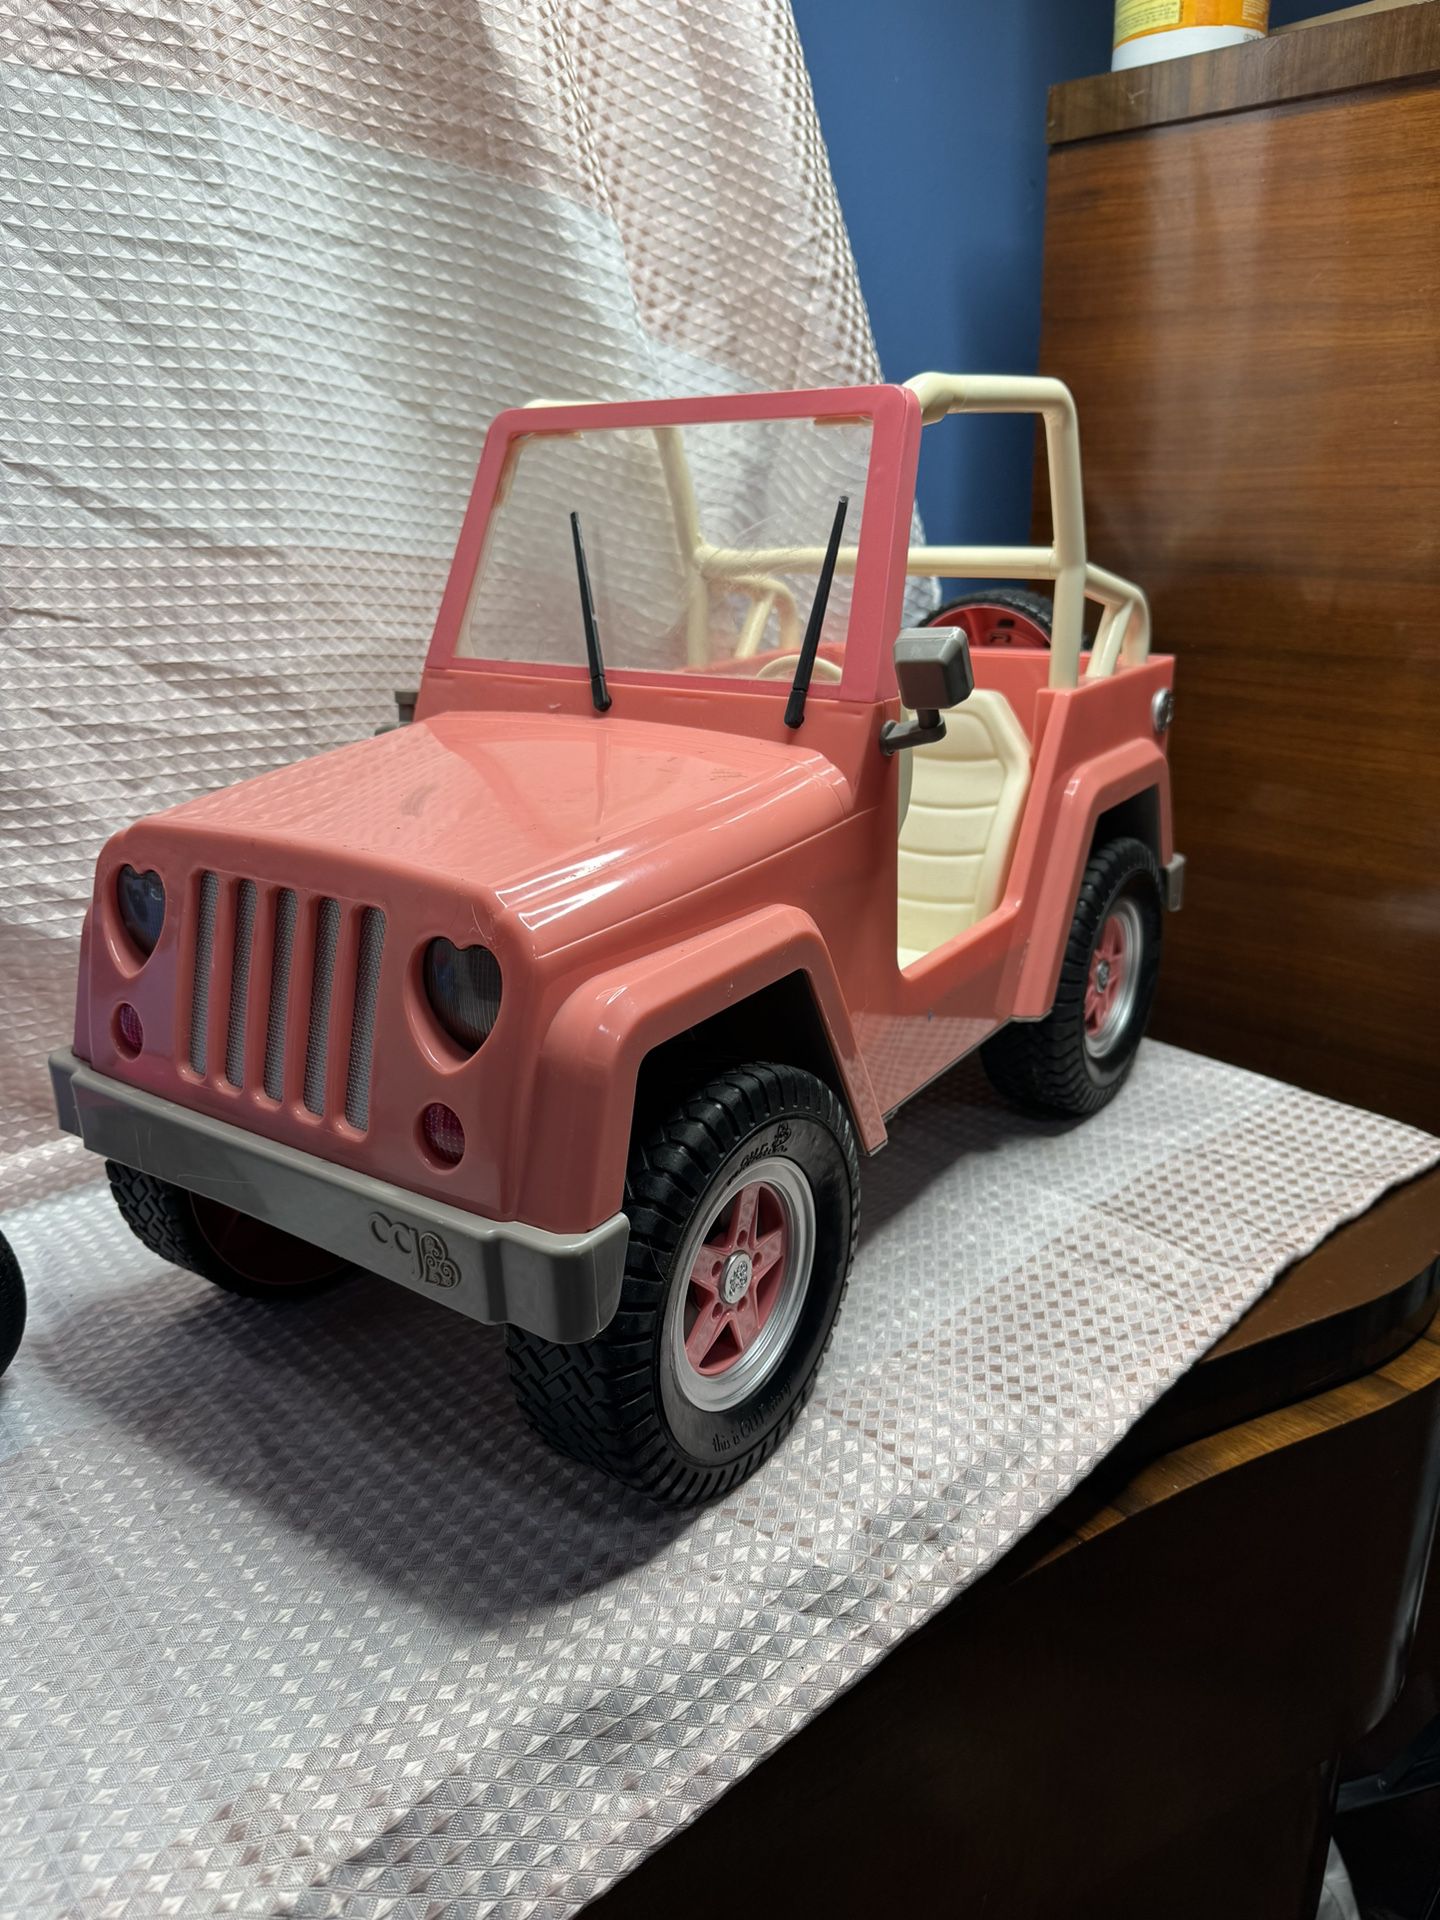 18 Inch Doll Jeep And Scooter 